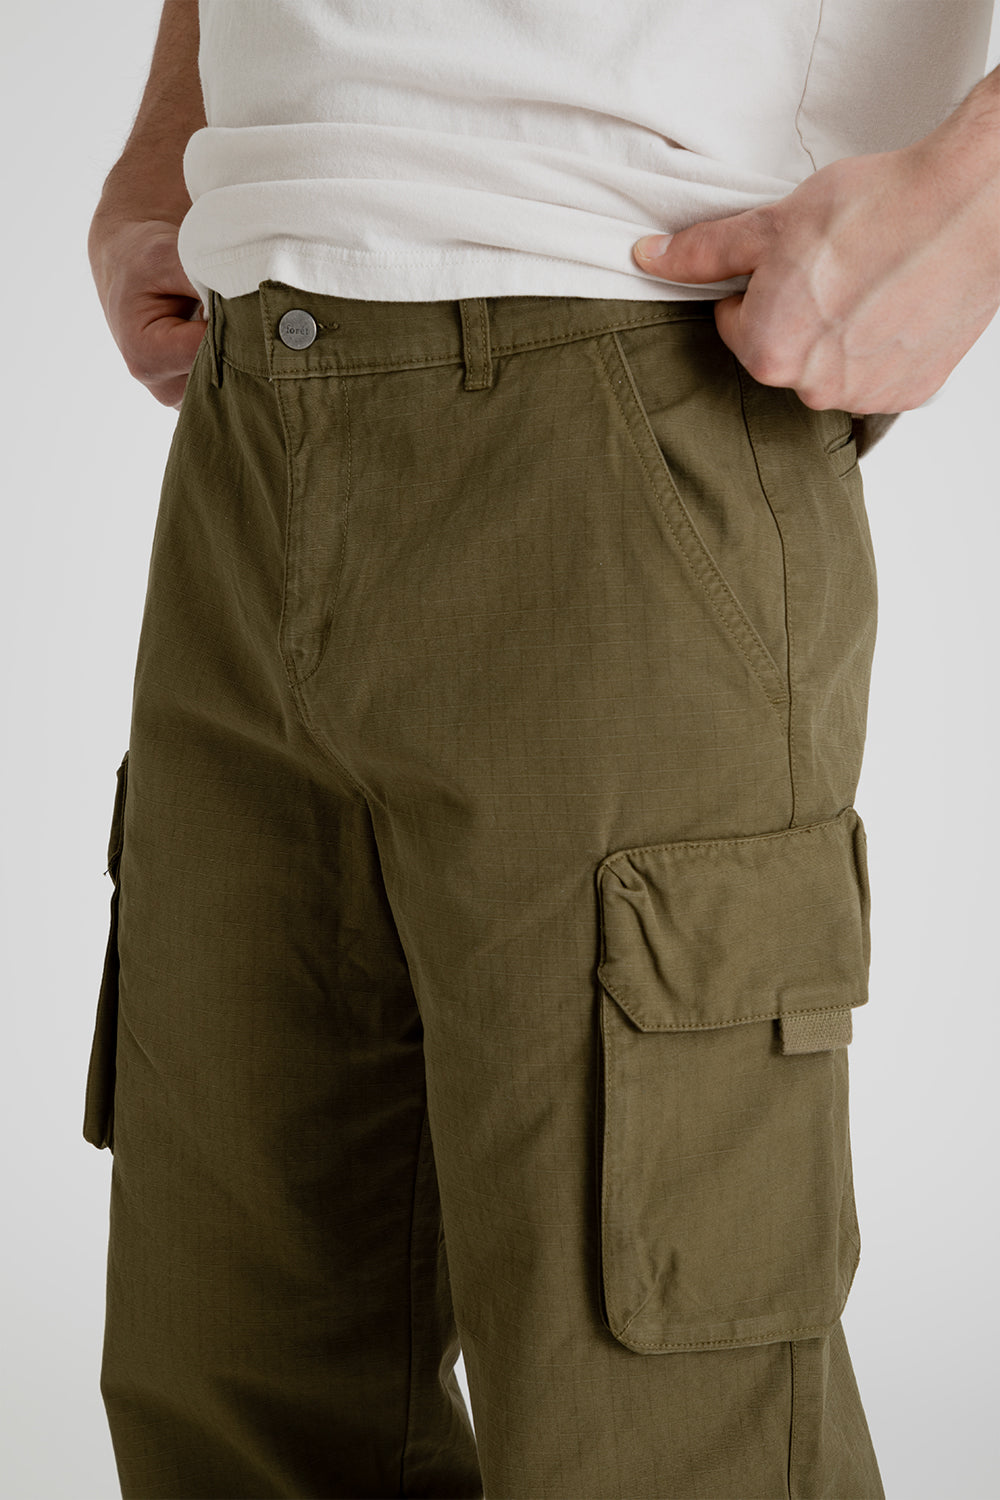 Foret Drip Cargo Pants in Army